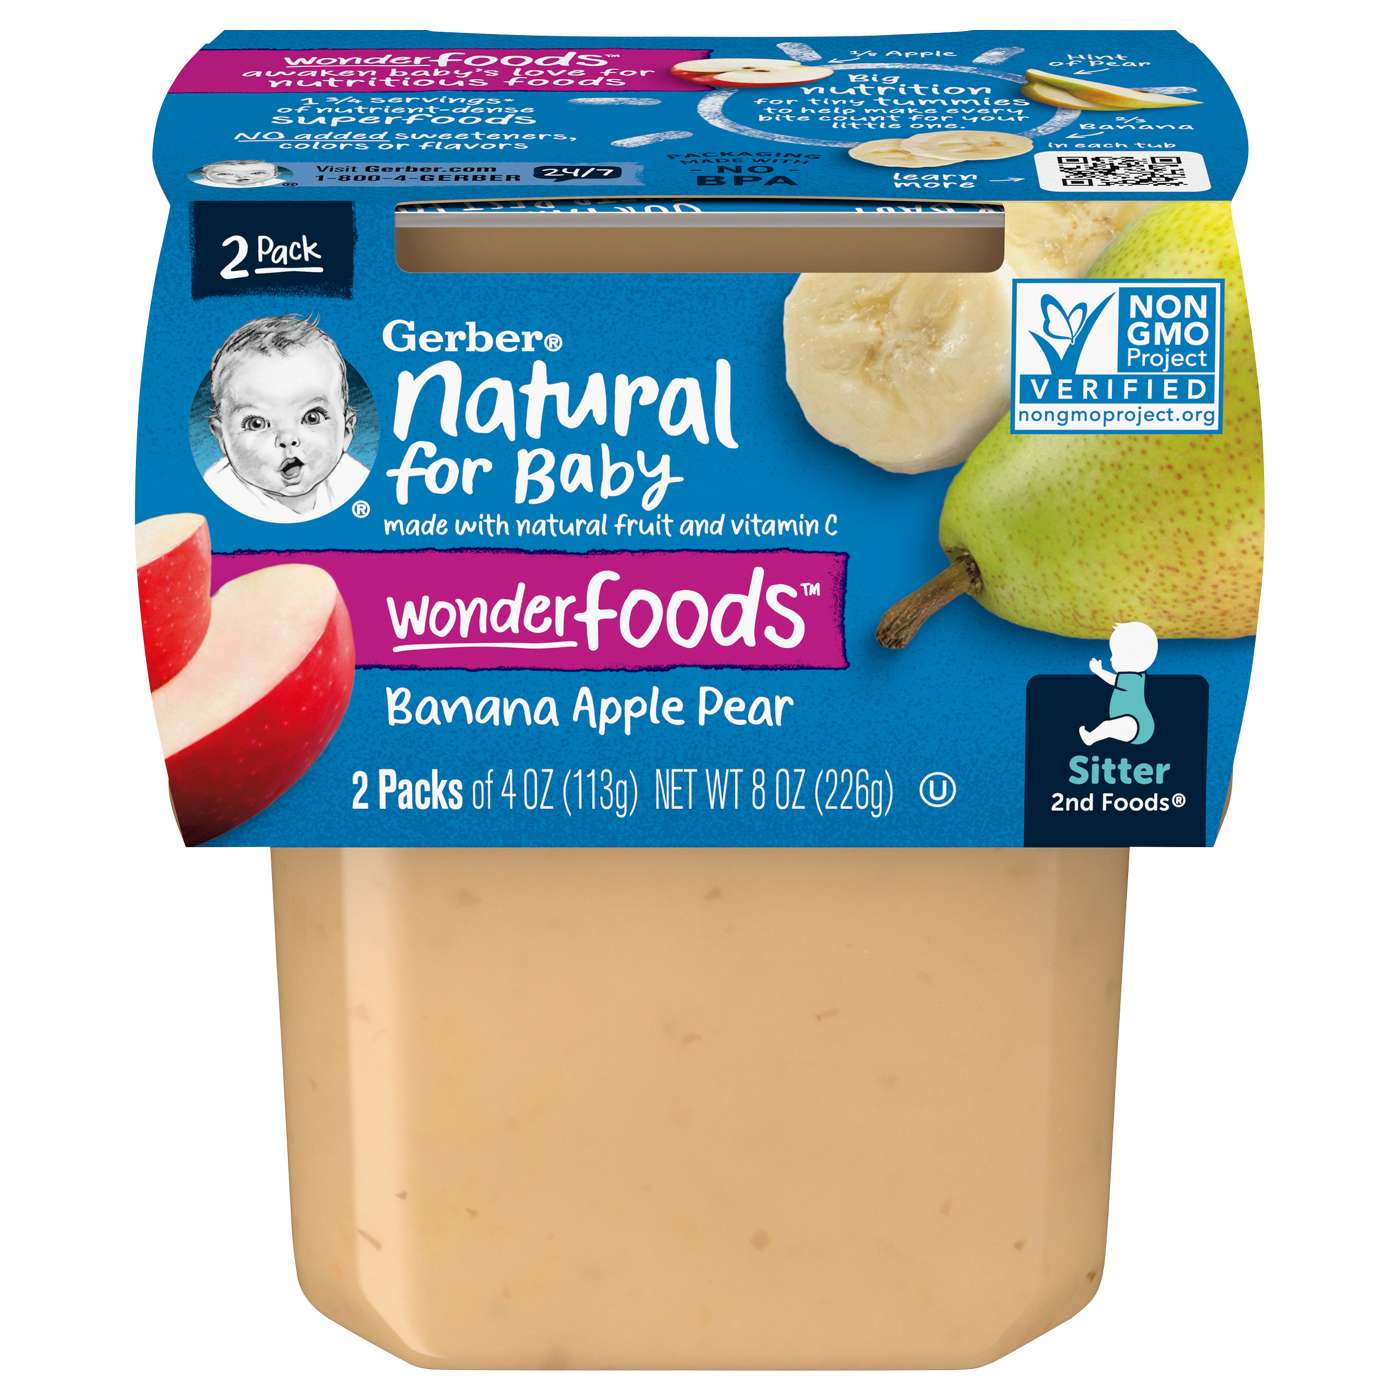 Gerber Natural for Baby Wonderfoods 2nd Foods - Banana Apple & Pear; image 1 of 2